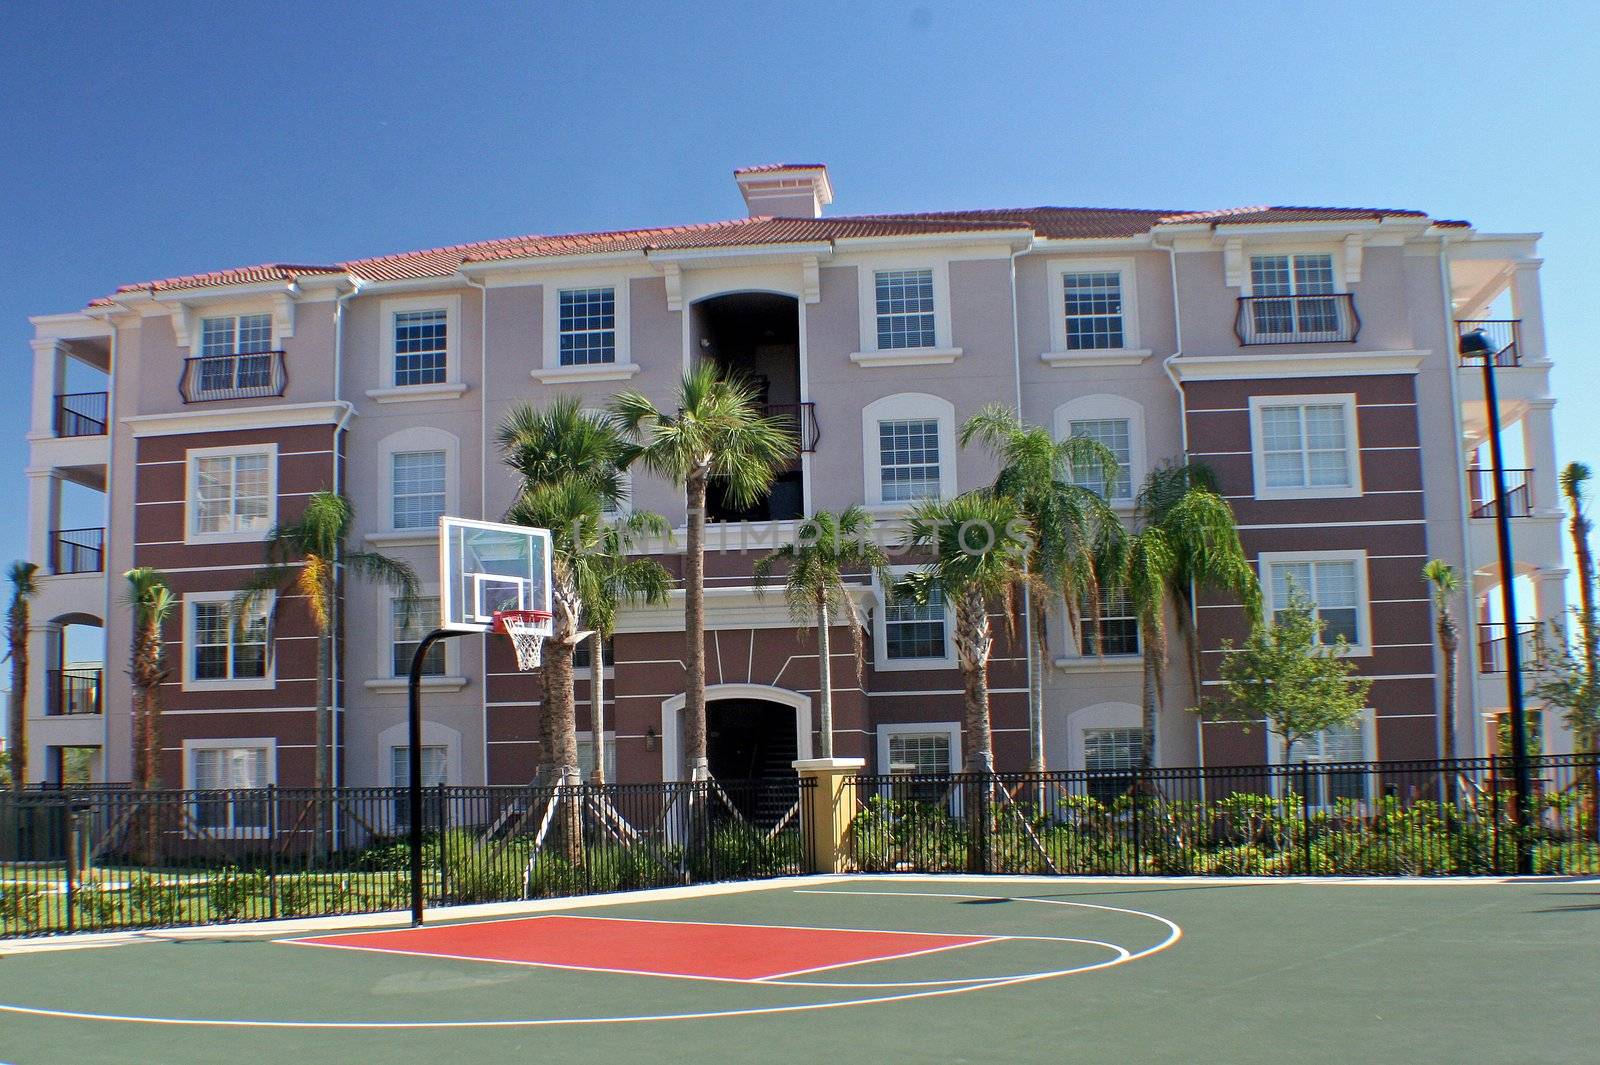 Colorful building behind basketball court in Florida.